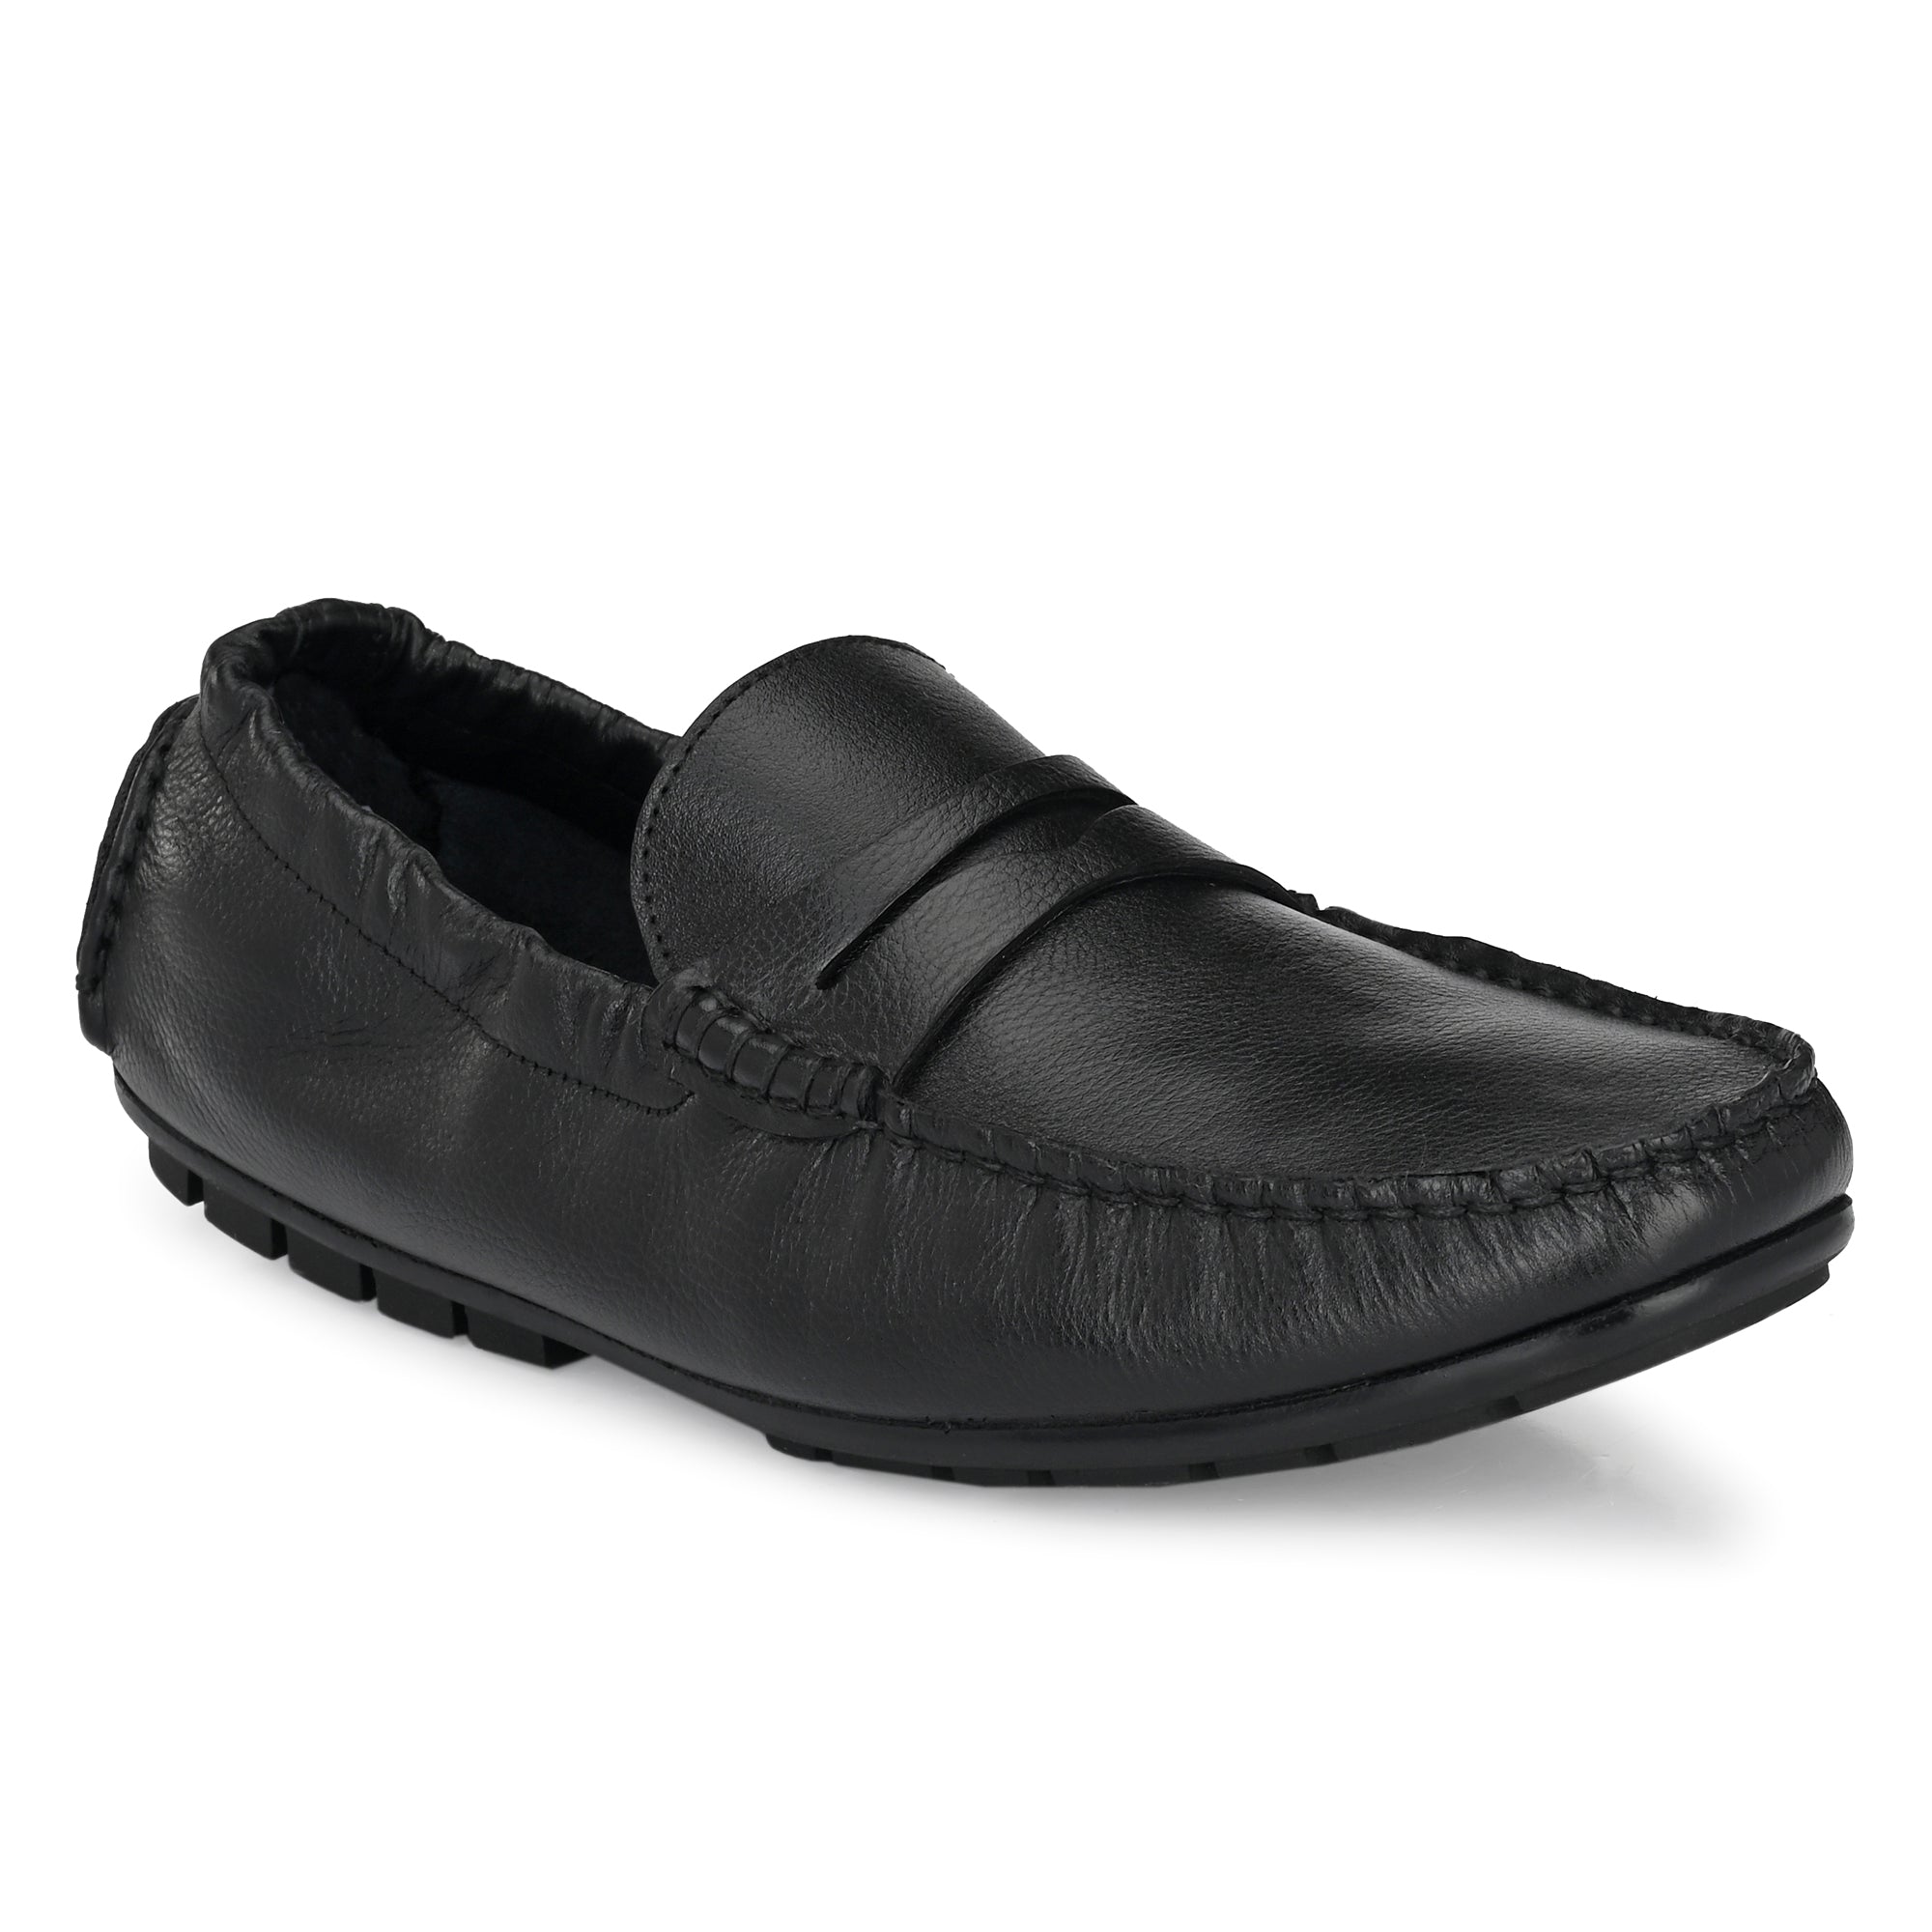 Egoss Casual Slip on Leather Loafers Shoes For Men